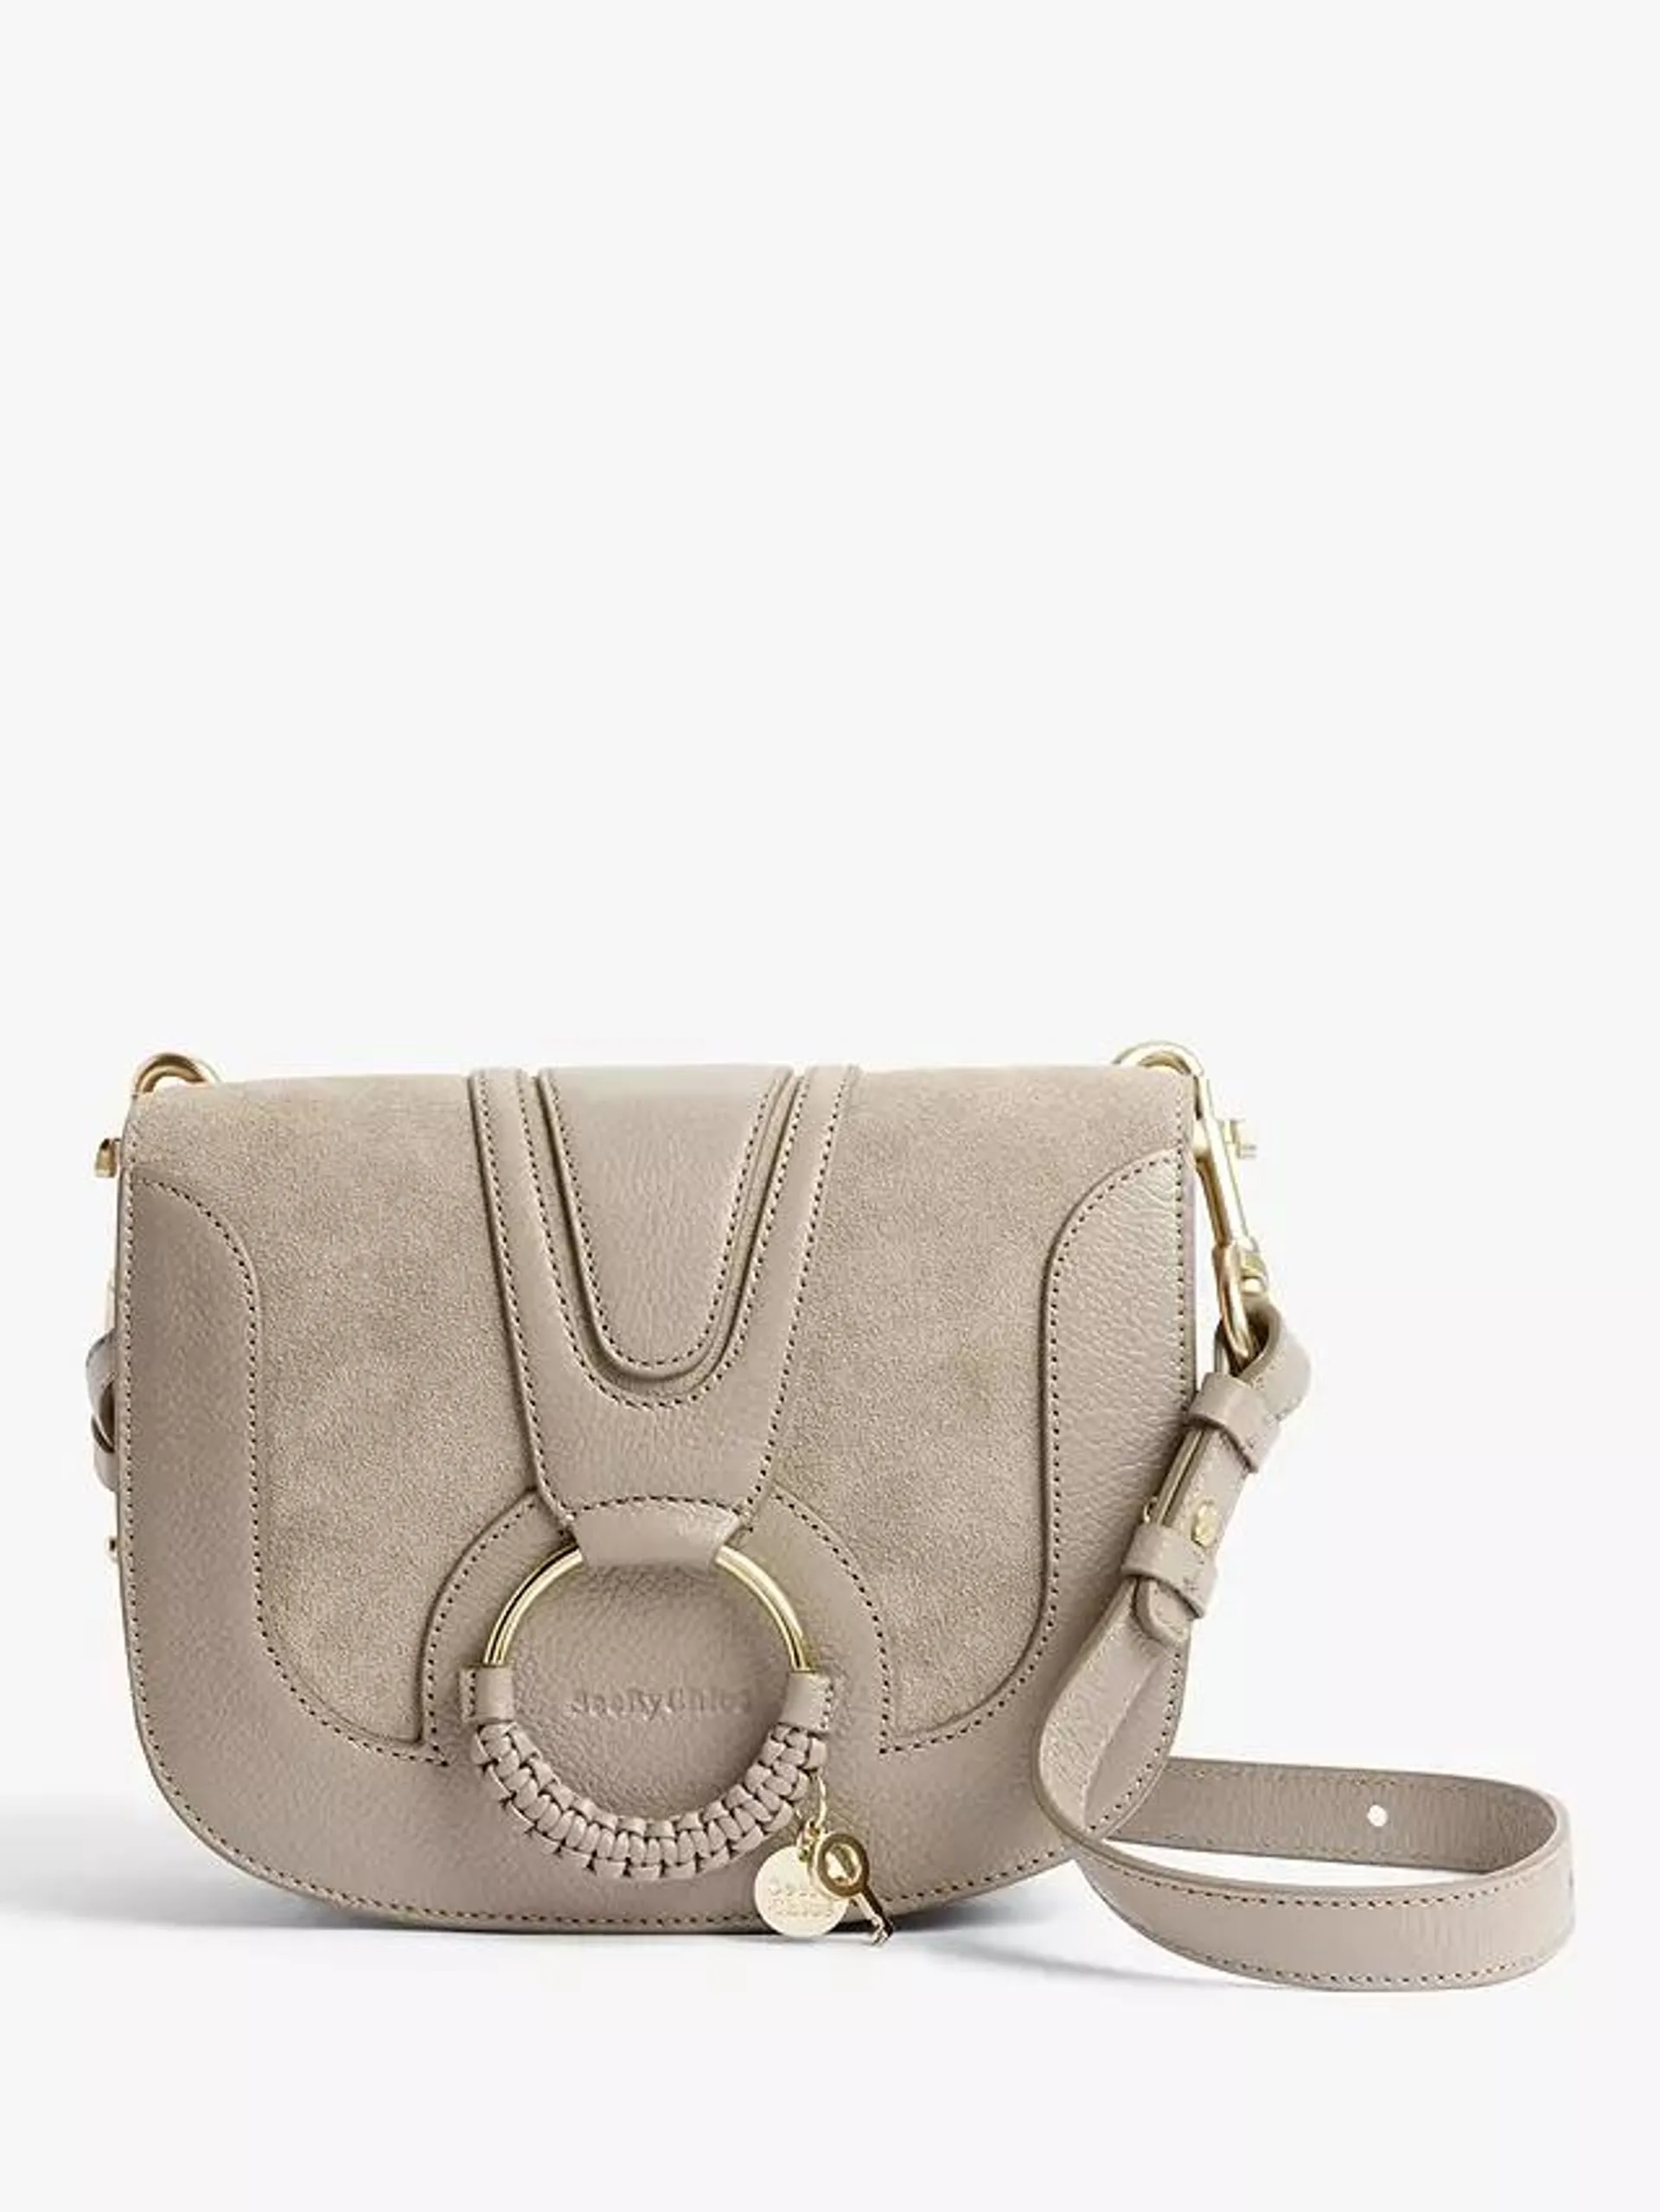 See By Chloé Small Hana Suede Leather Satchel Bag, Motty Grey